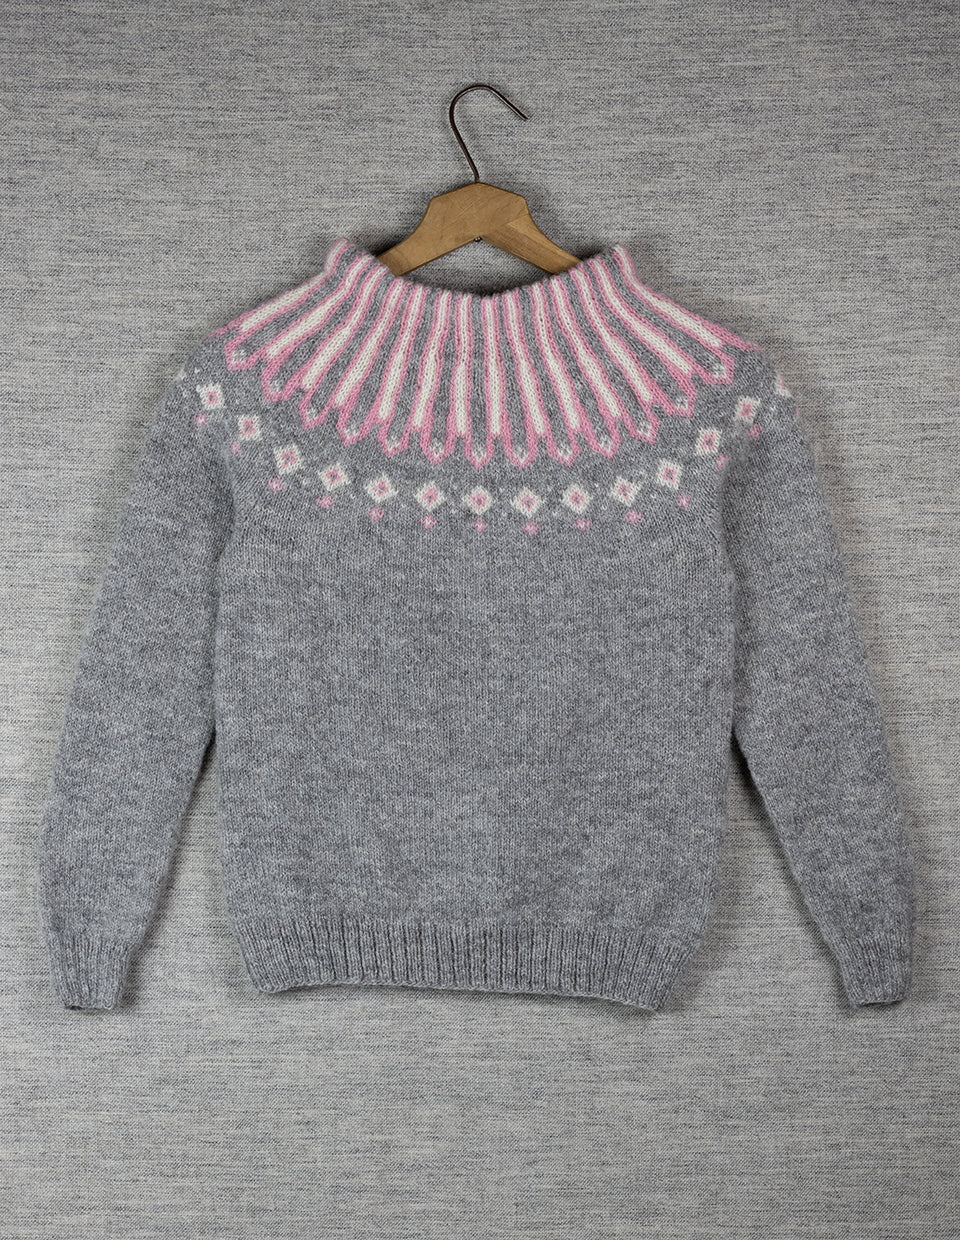 GRY, grey sweater with free choice of colour in the yoke. Size S/M